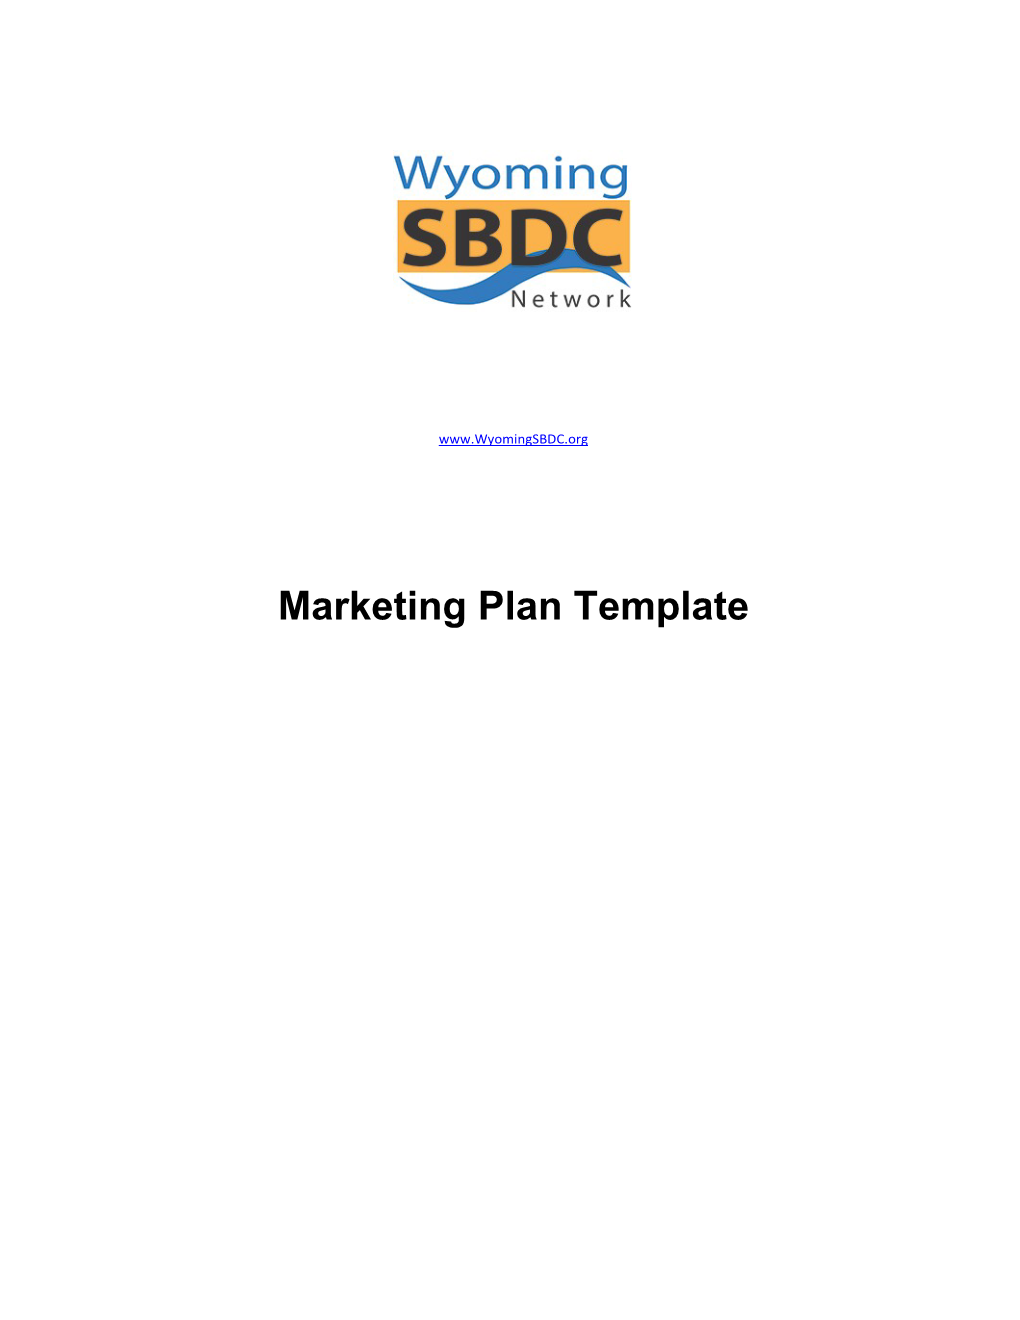 Marketing Plan Template INTRODUCTION